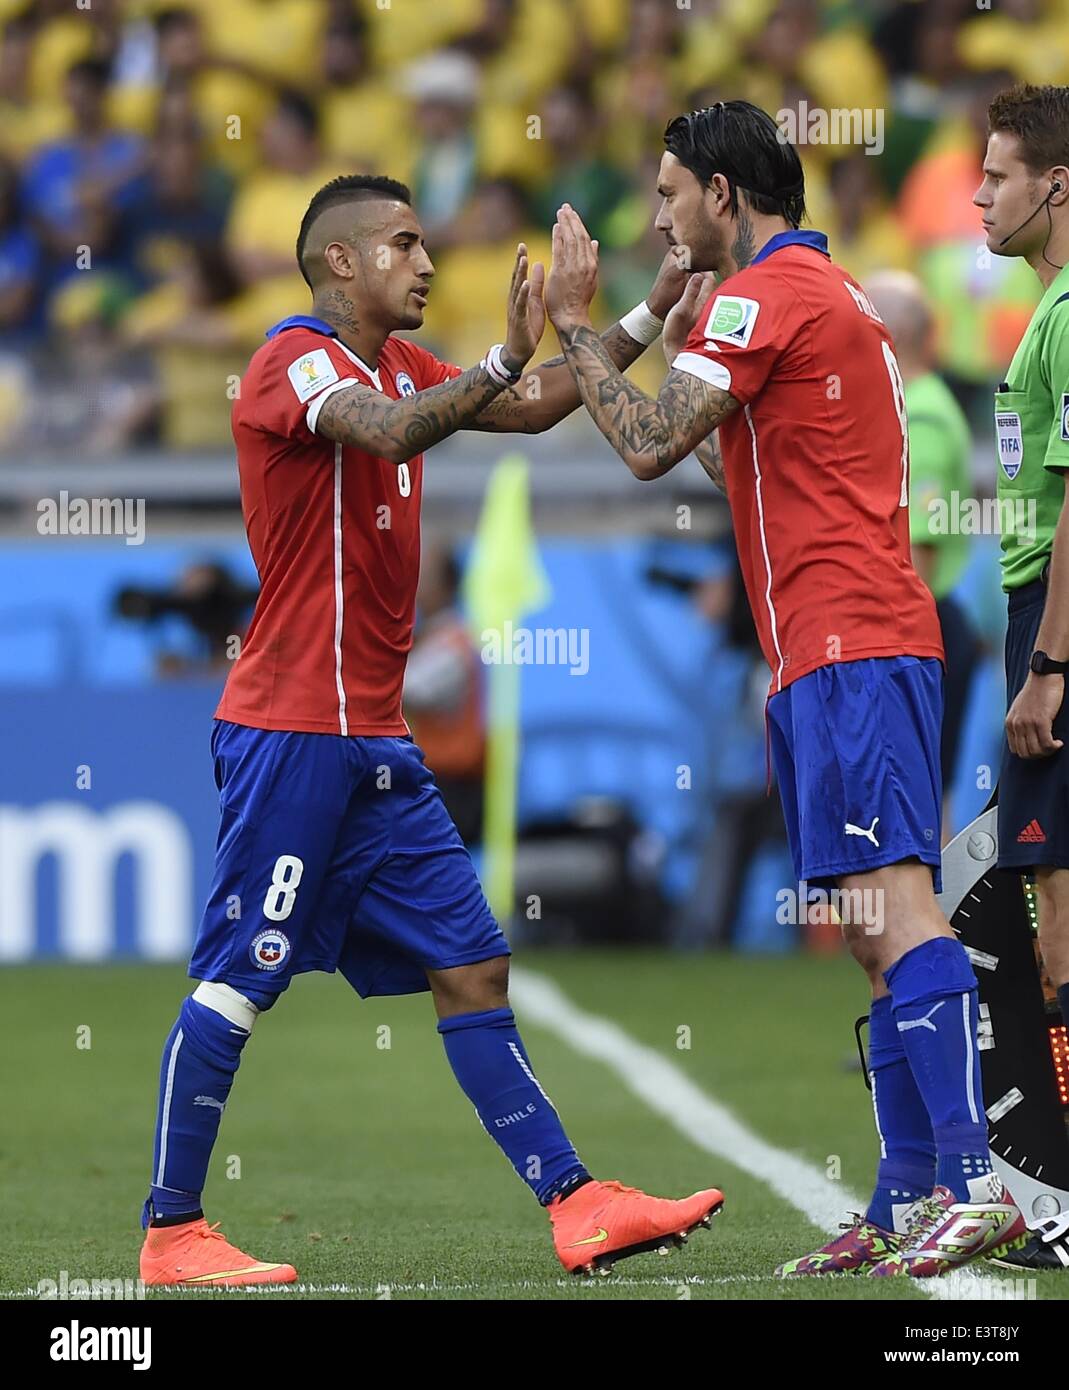 Belo Horizonte, Brazil. 28th June, 2014. Chile's Mauricio Pinilla (R) replaces Arturo Vidal during a Round of 16 match between Brazil and Chile of 2014 FIFA World Cup at the Estadio Mineirao Stadium in Belo Horizonte, Brazil, on June 28, 2014. Credit:  Qi Heng/Xinhua/Alamy Live News Stock Photo